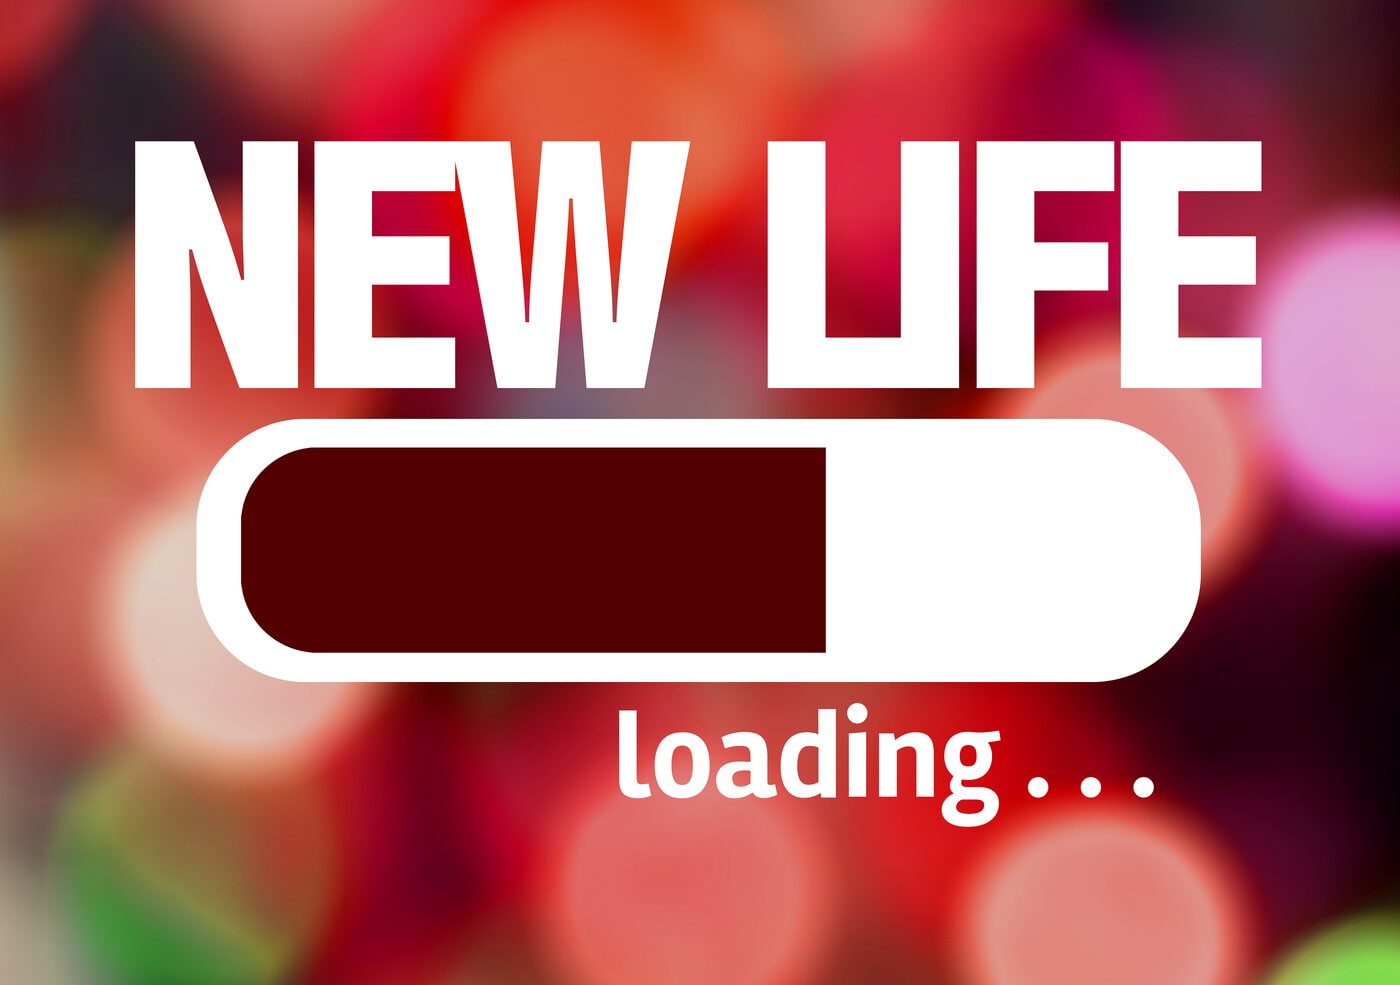 Colorful background with "New Life" and a progress bar loding